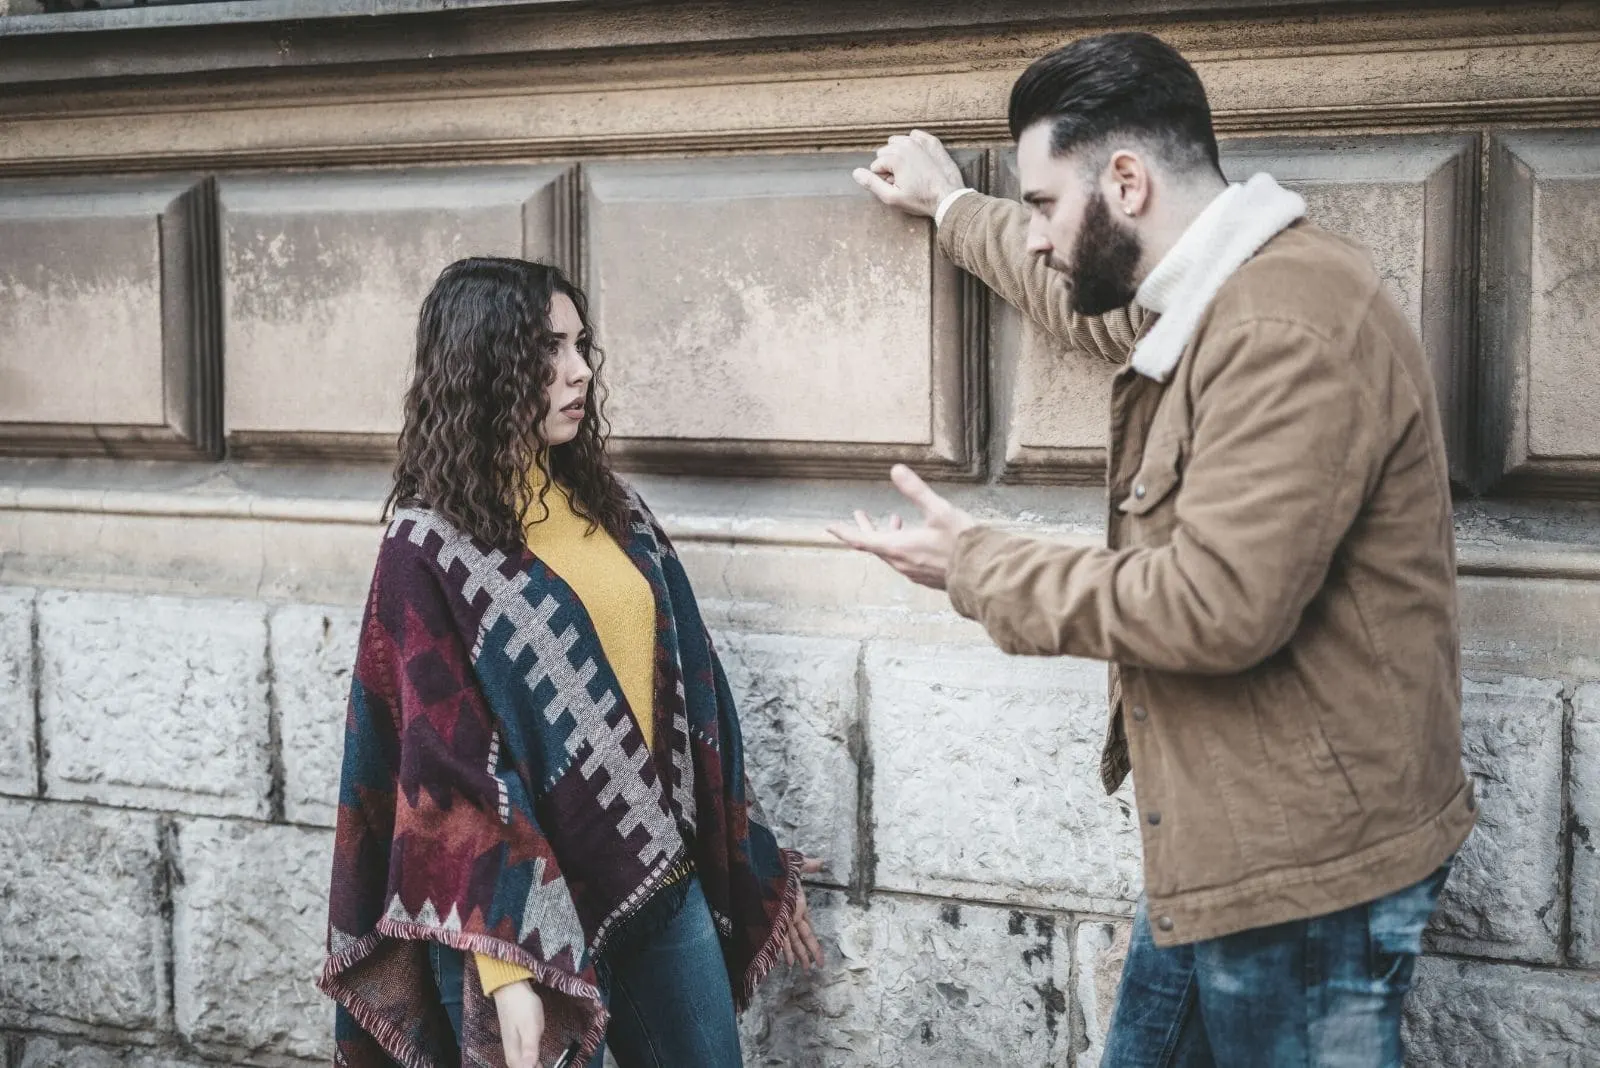 couple arguing outdoors near a large brick wall in the street